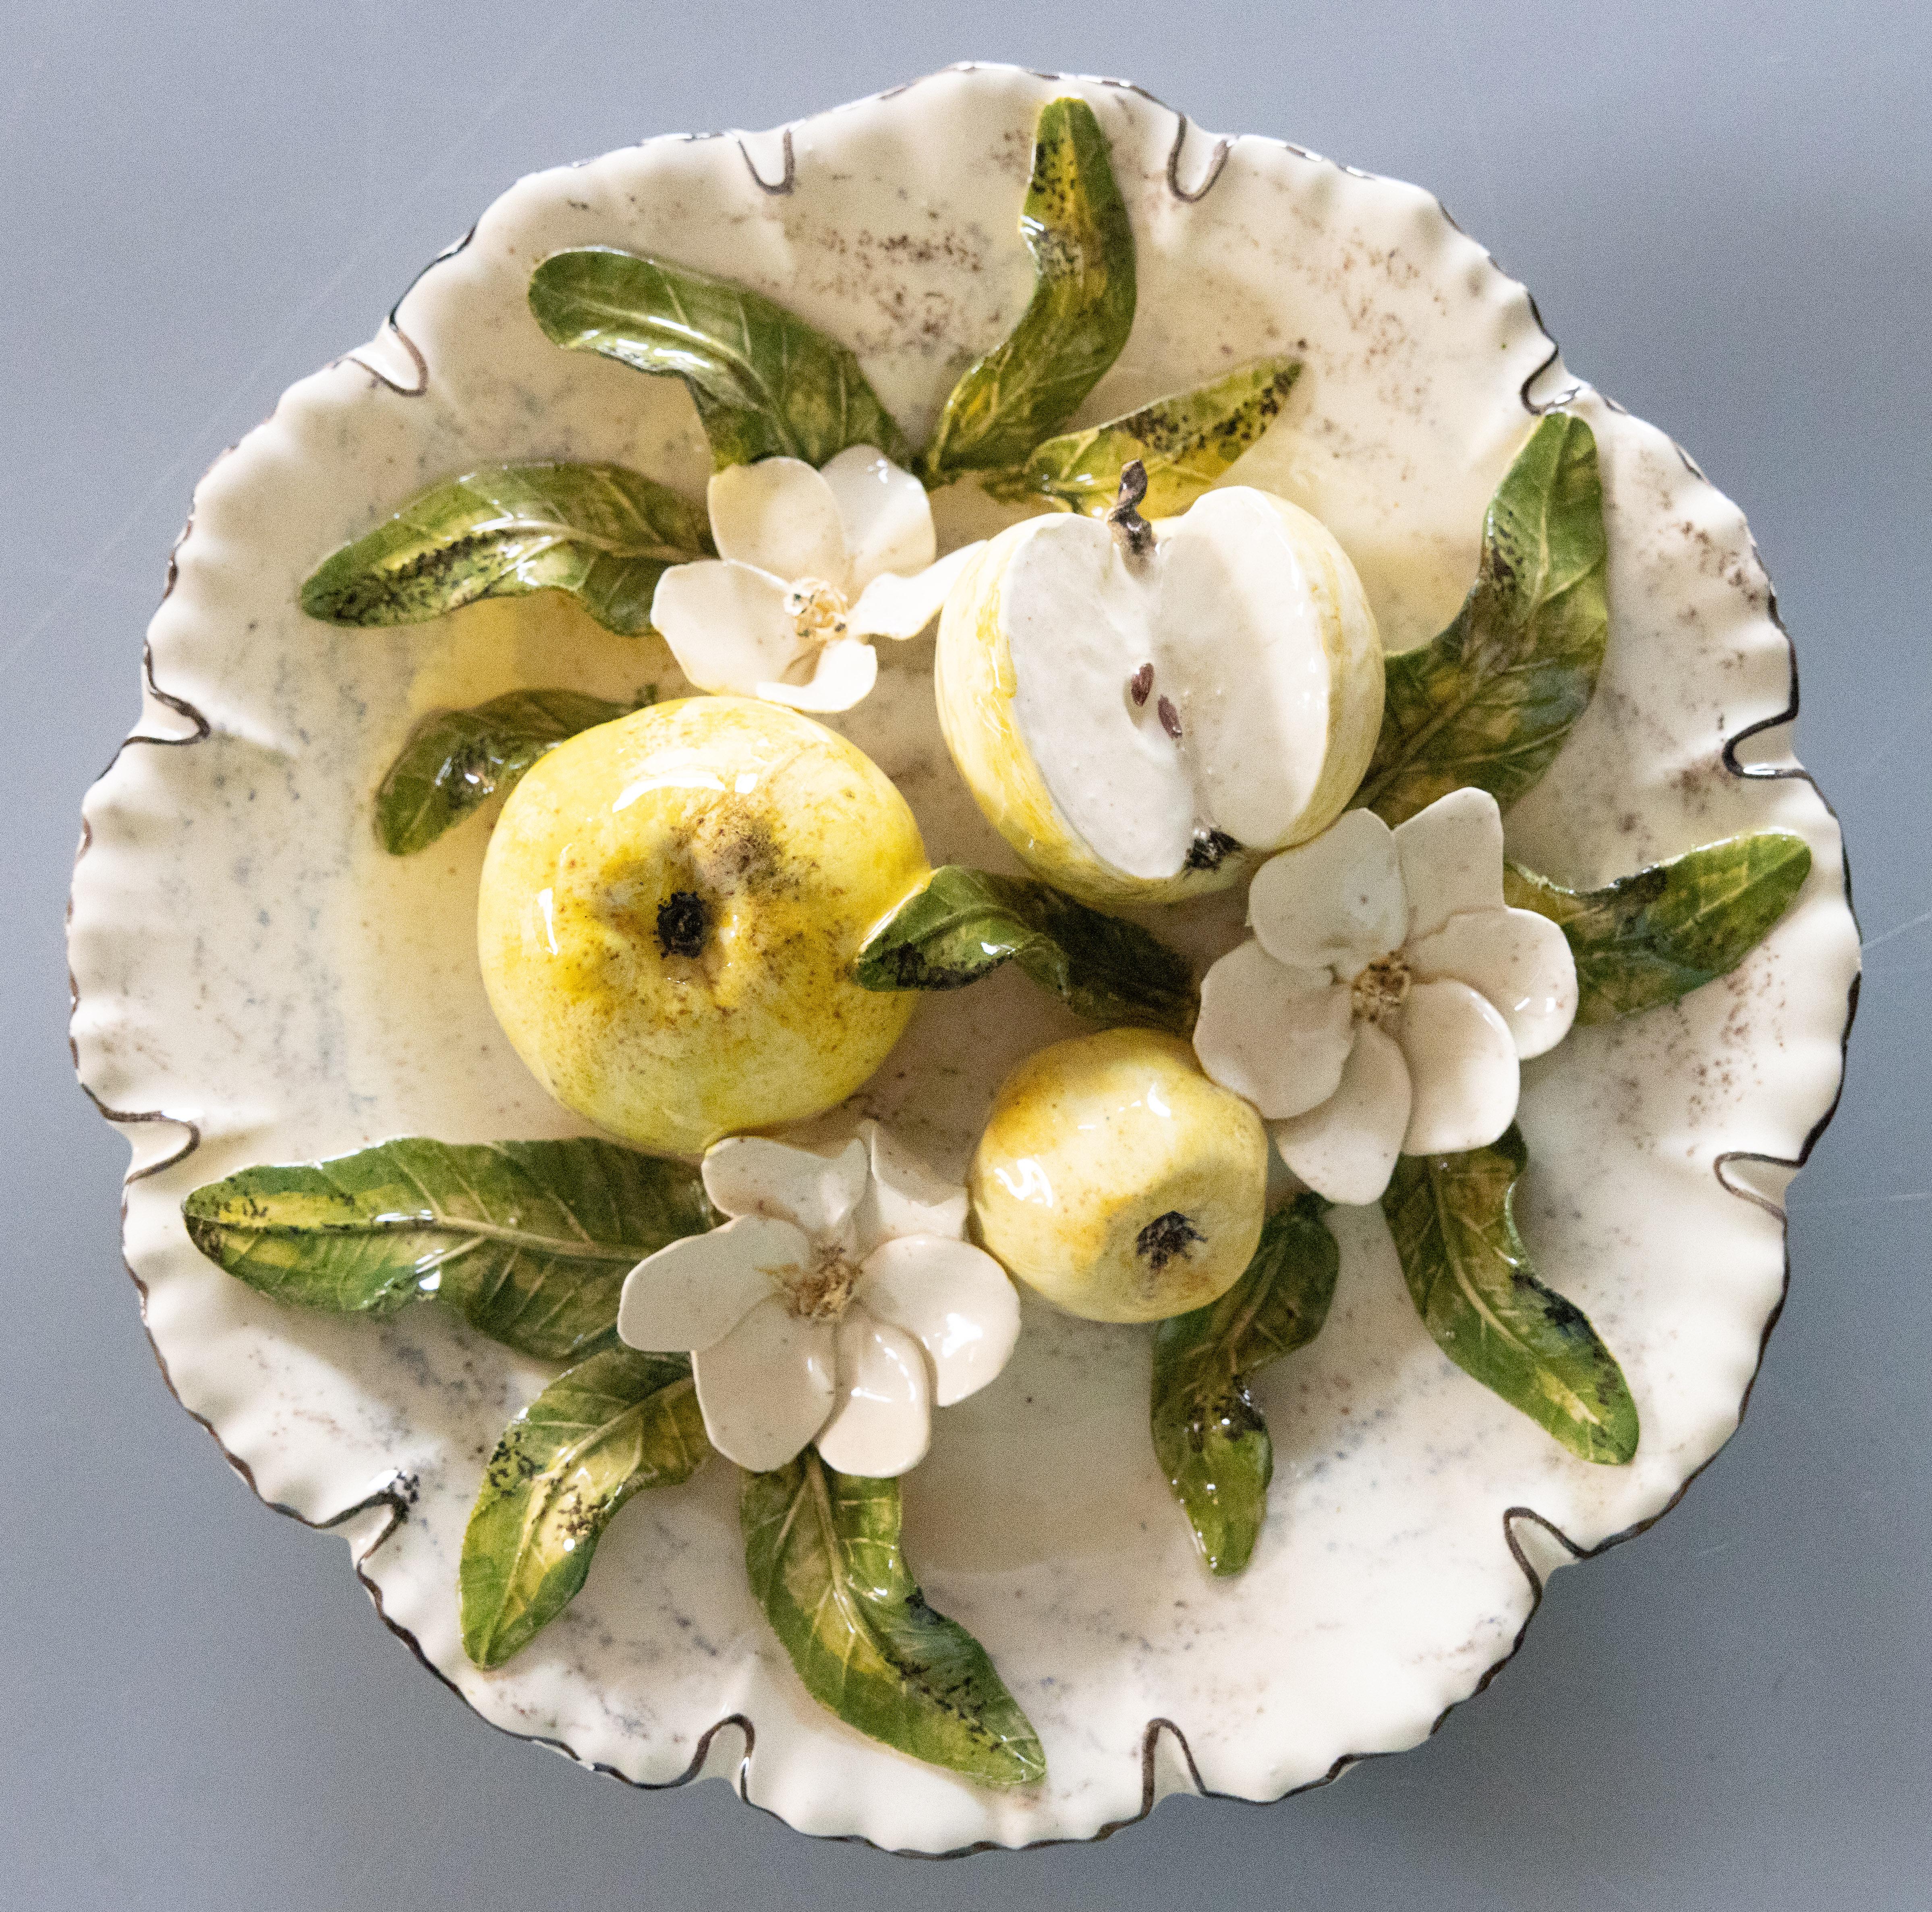 Ceramic French Majolica Palissy Trompe L'oeil Apples & Flowers Plate Christine Viennet For Sale